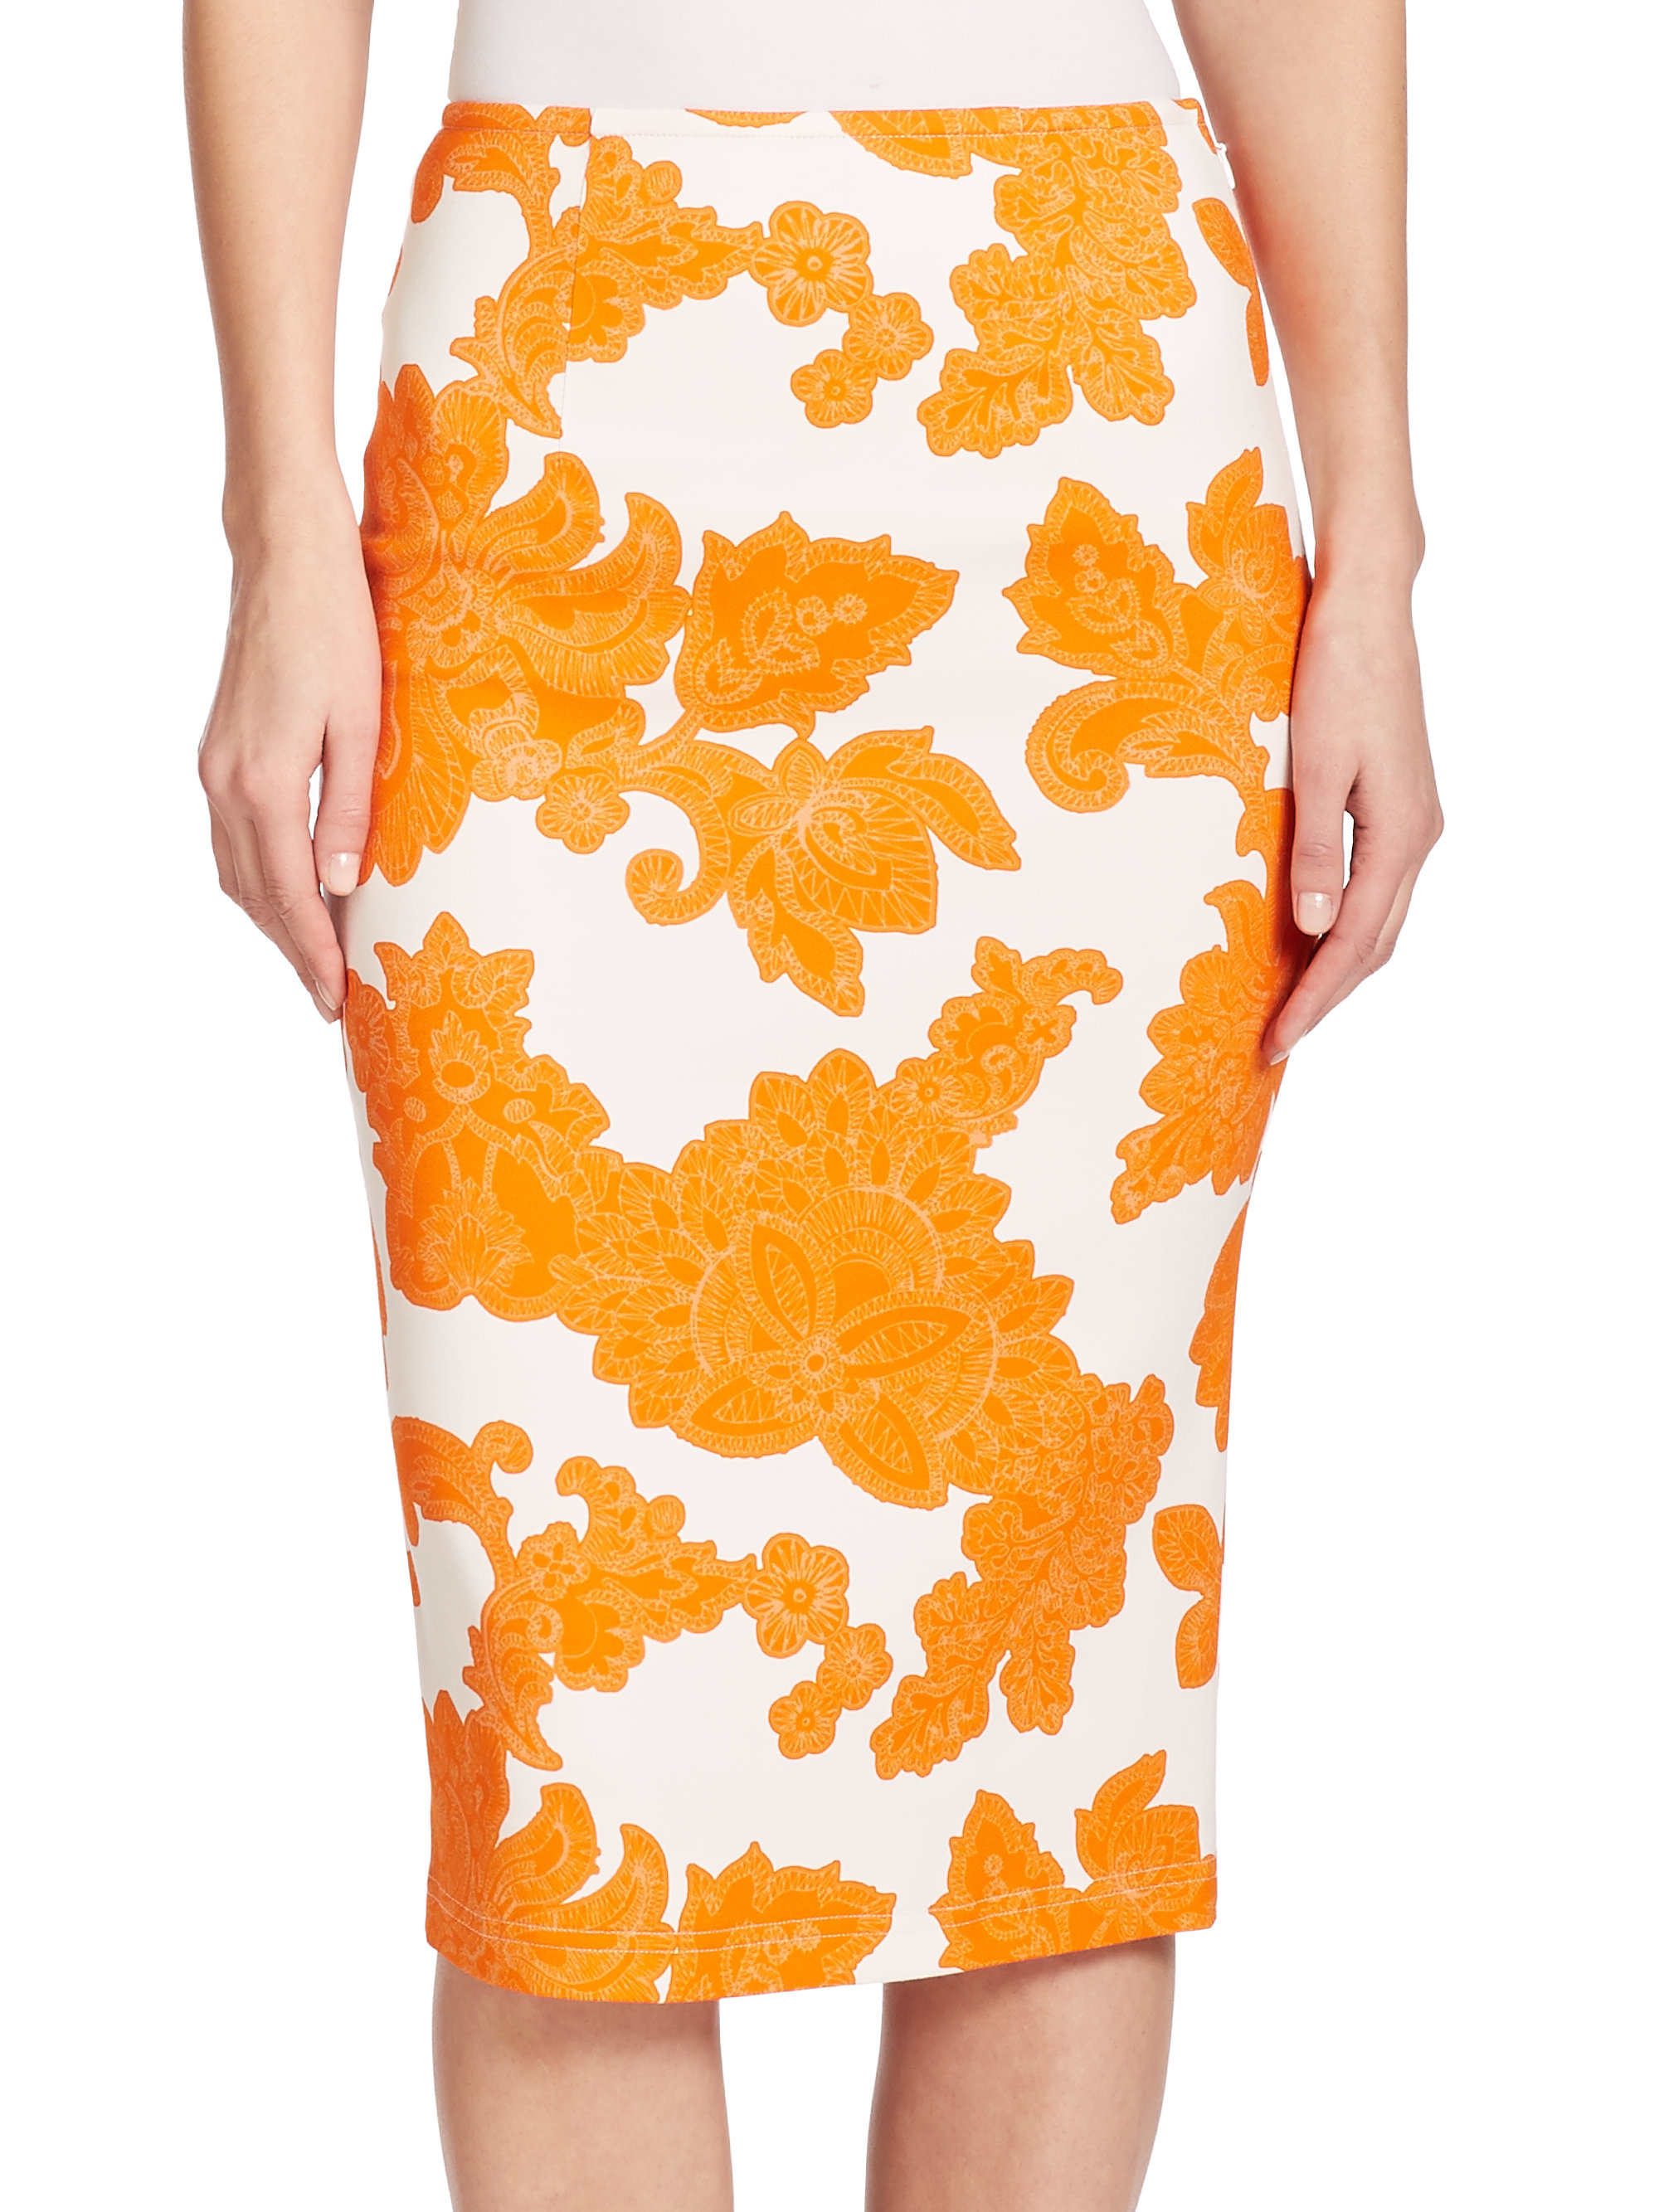 Lyst - Tanya Taylor Peggy Paisley Floral Pencil Skirt in Orange